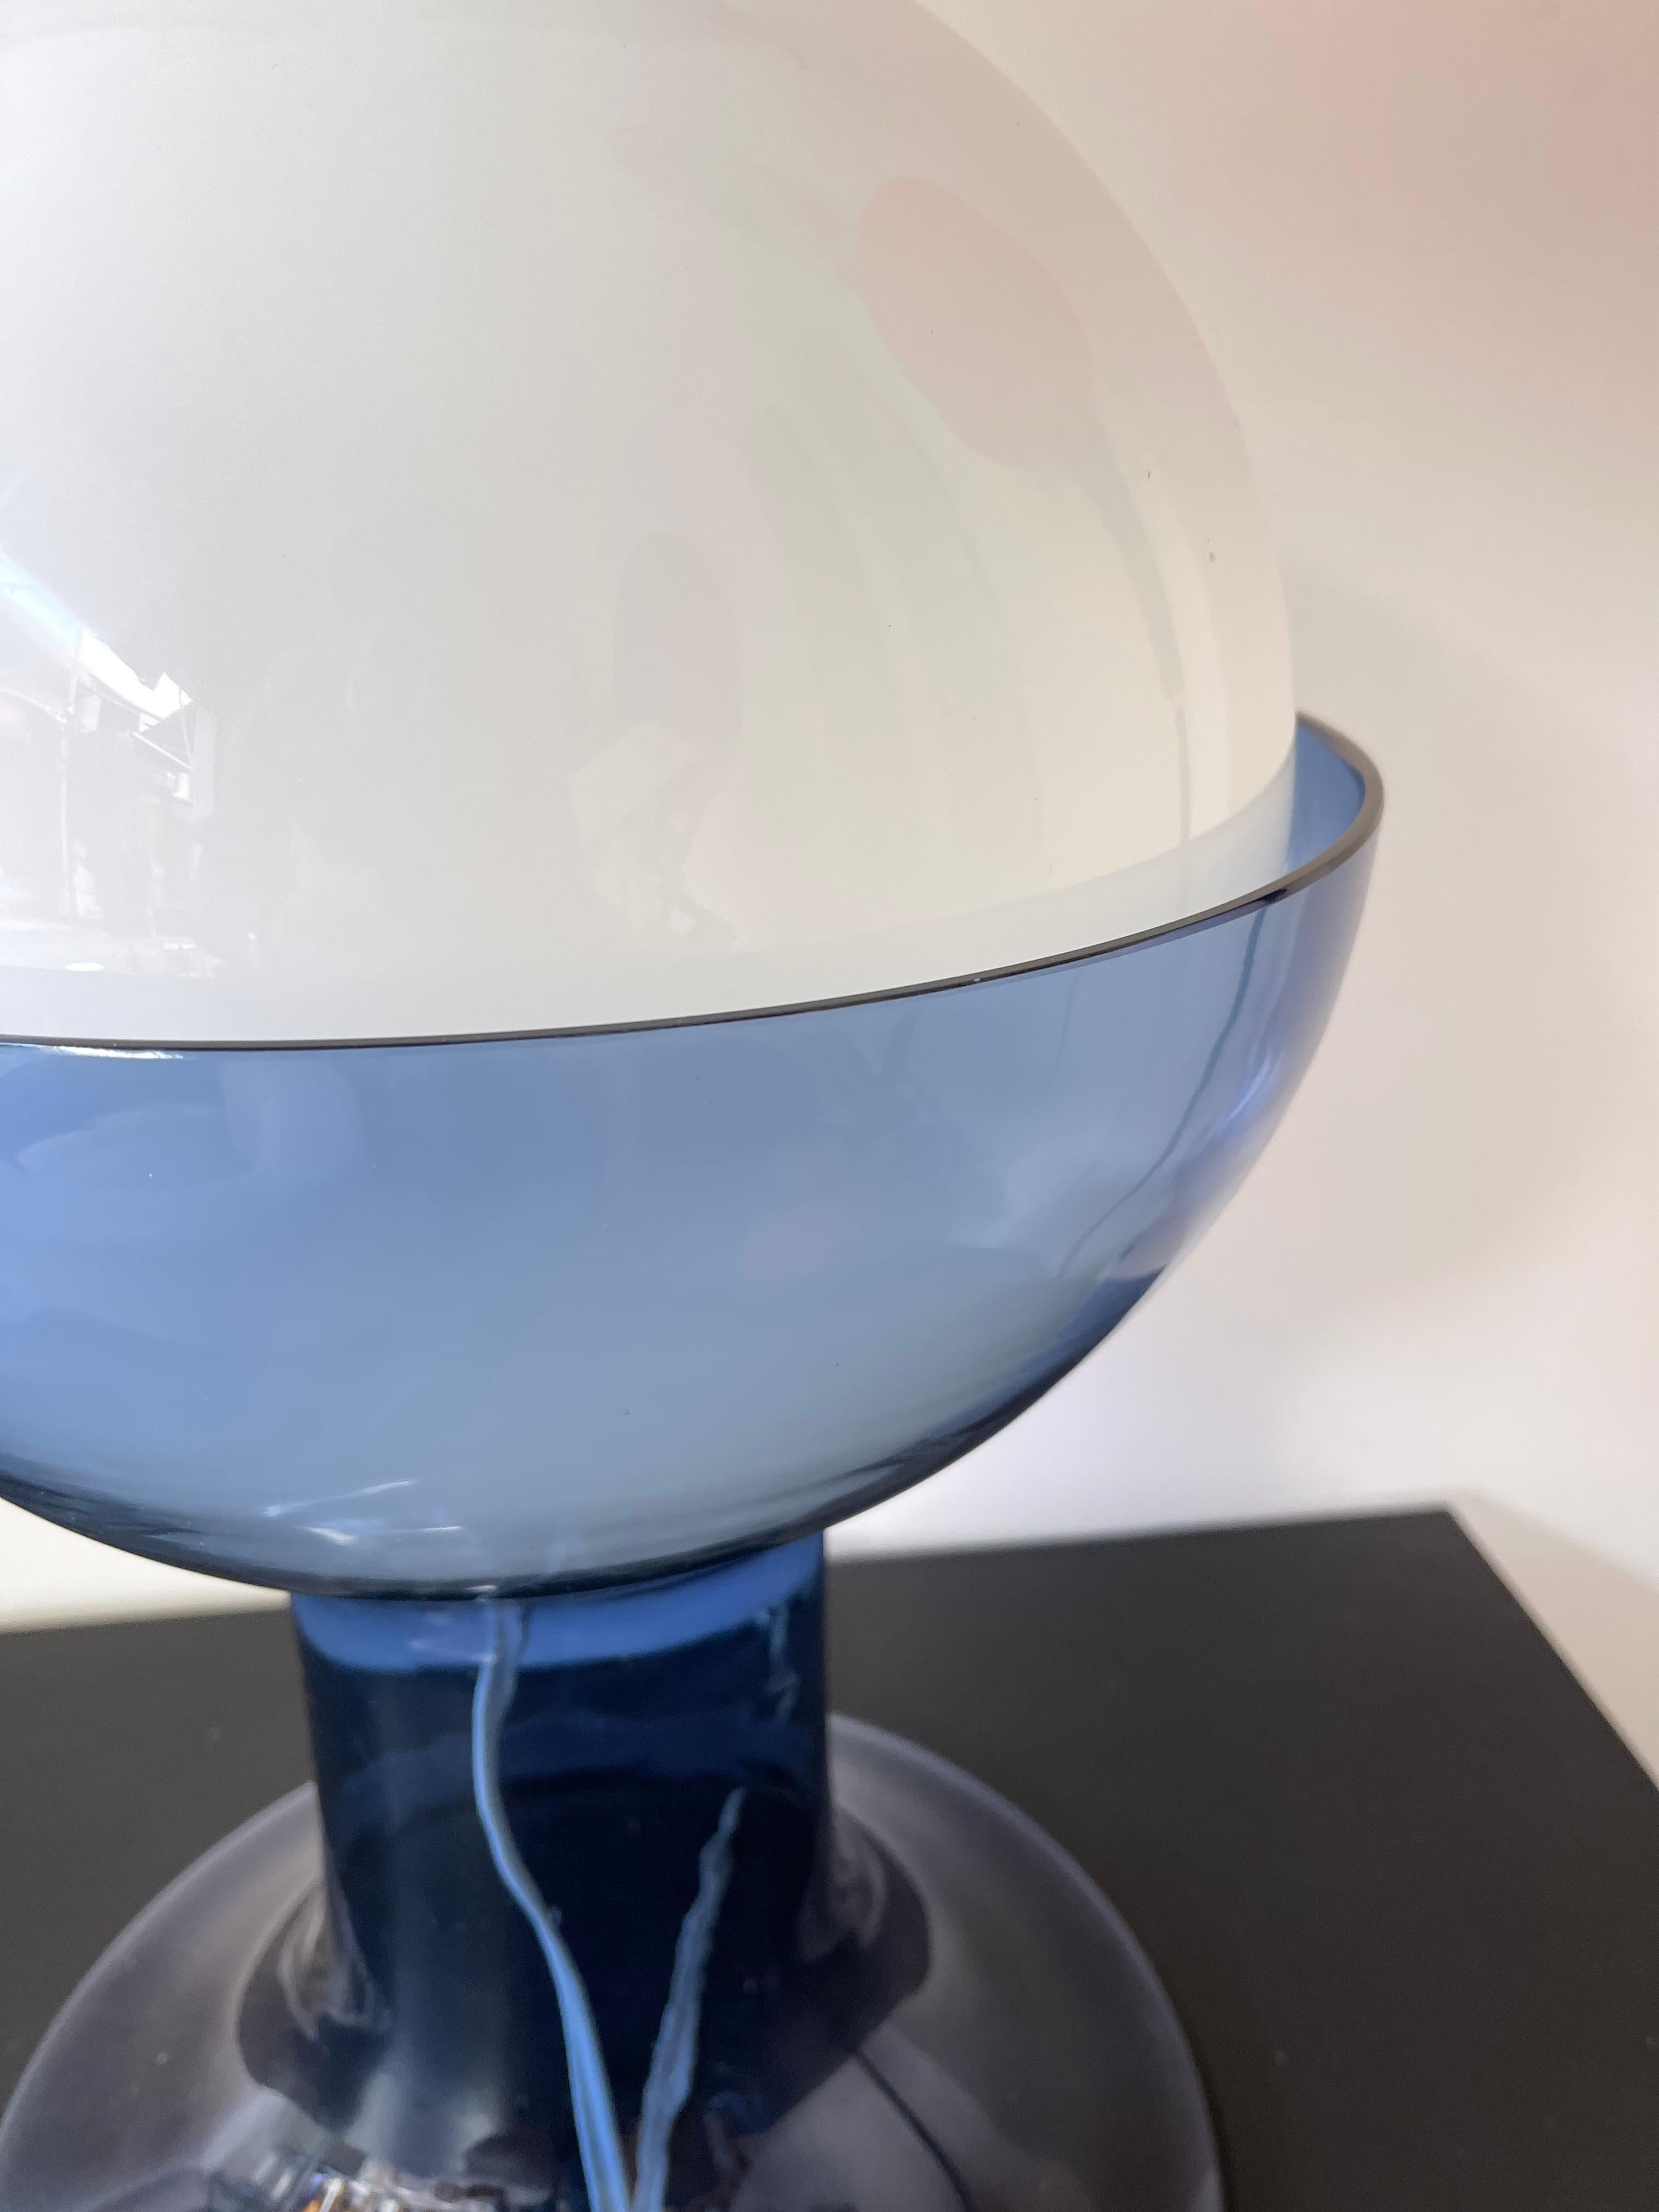 Rare pair of table or bedside lamps model LT216, the large size of the model by the designer Carlo Nason for the italian design manufacture Mazzega. Blue Murano glass and white opaline ball difusor. Famous editor manufacture like Venini, Vistosi, La